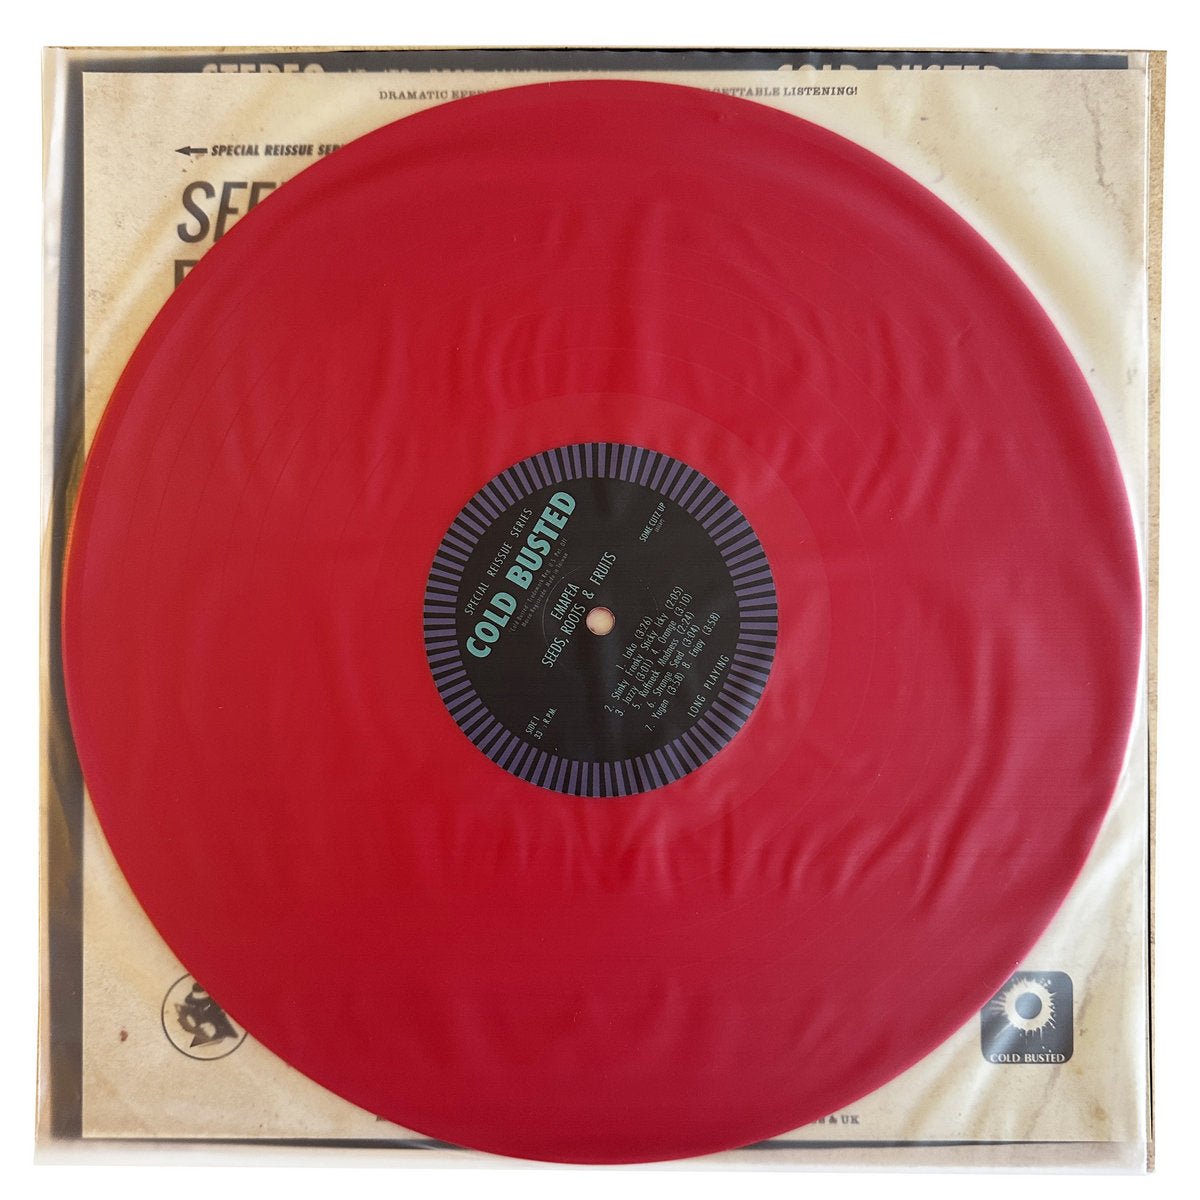 Emapea - Seeds, Roots & Fruits - Special Reissue Series Red or Red and Black Marbled 12 Inch Vinyl - COLD BUSTED